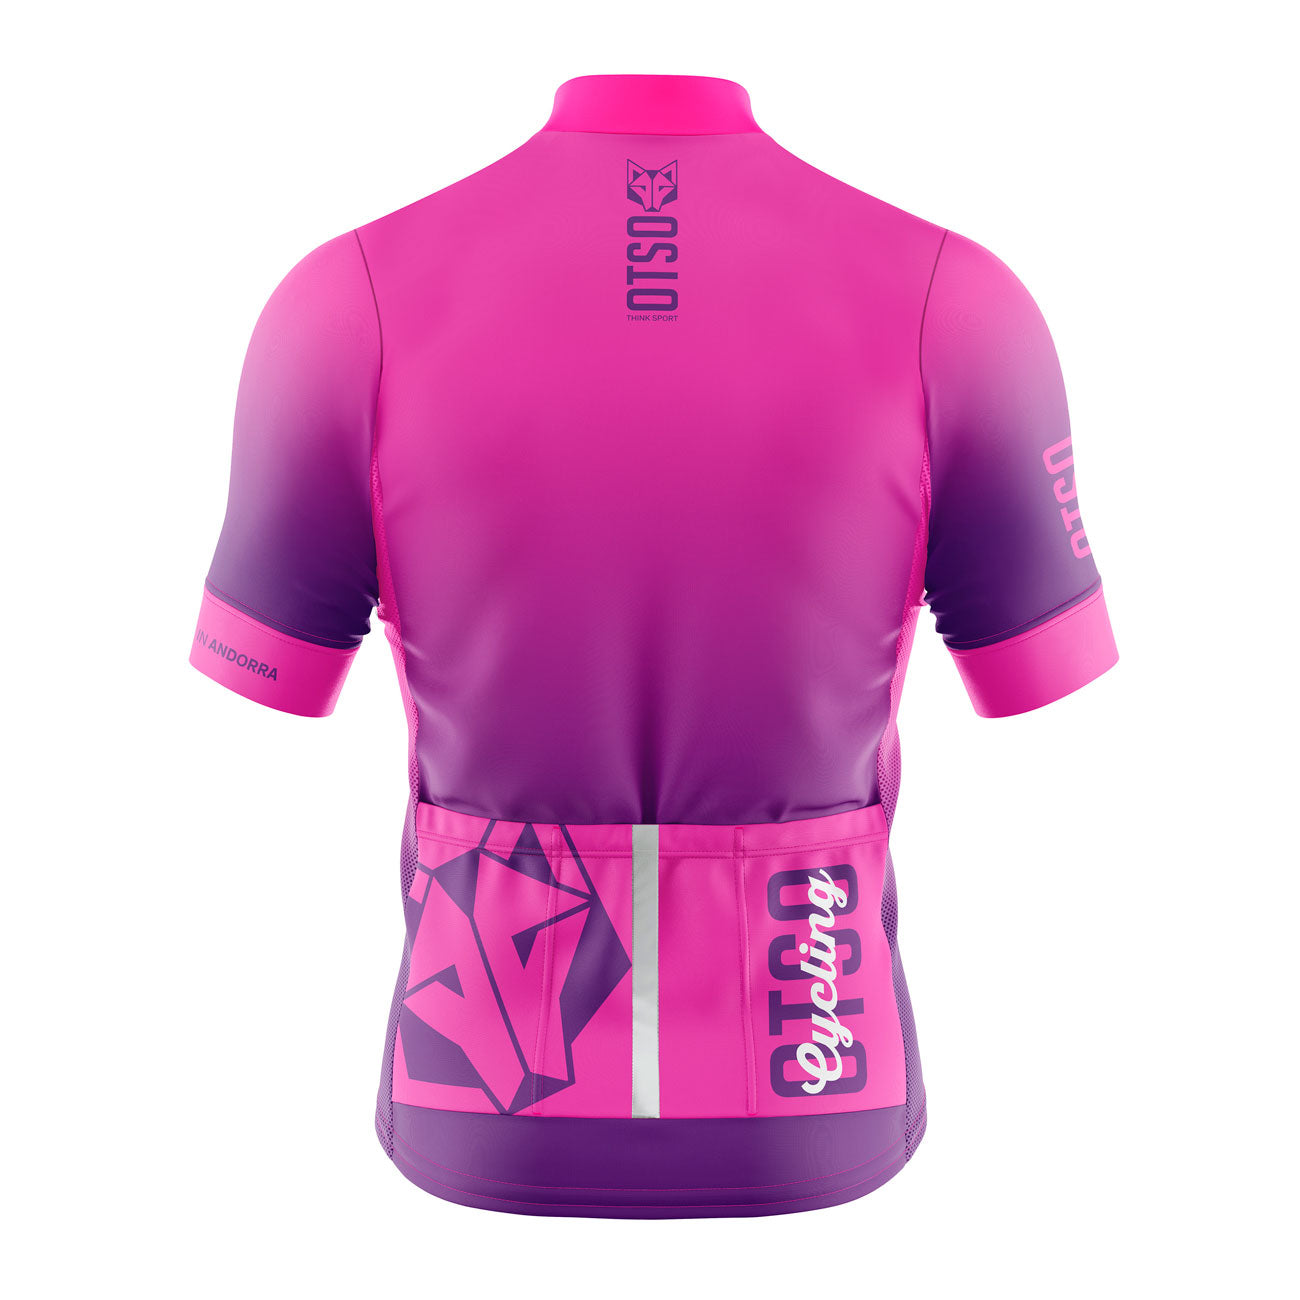 Maillot de ciclismo manga corta hombre - Fluo Pink (Outlet)